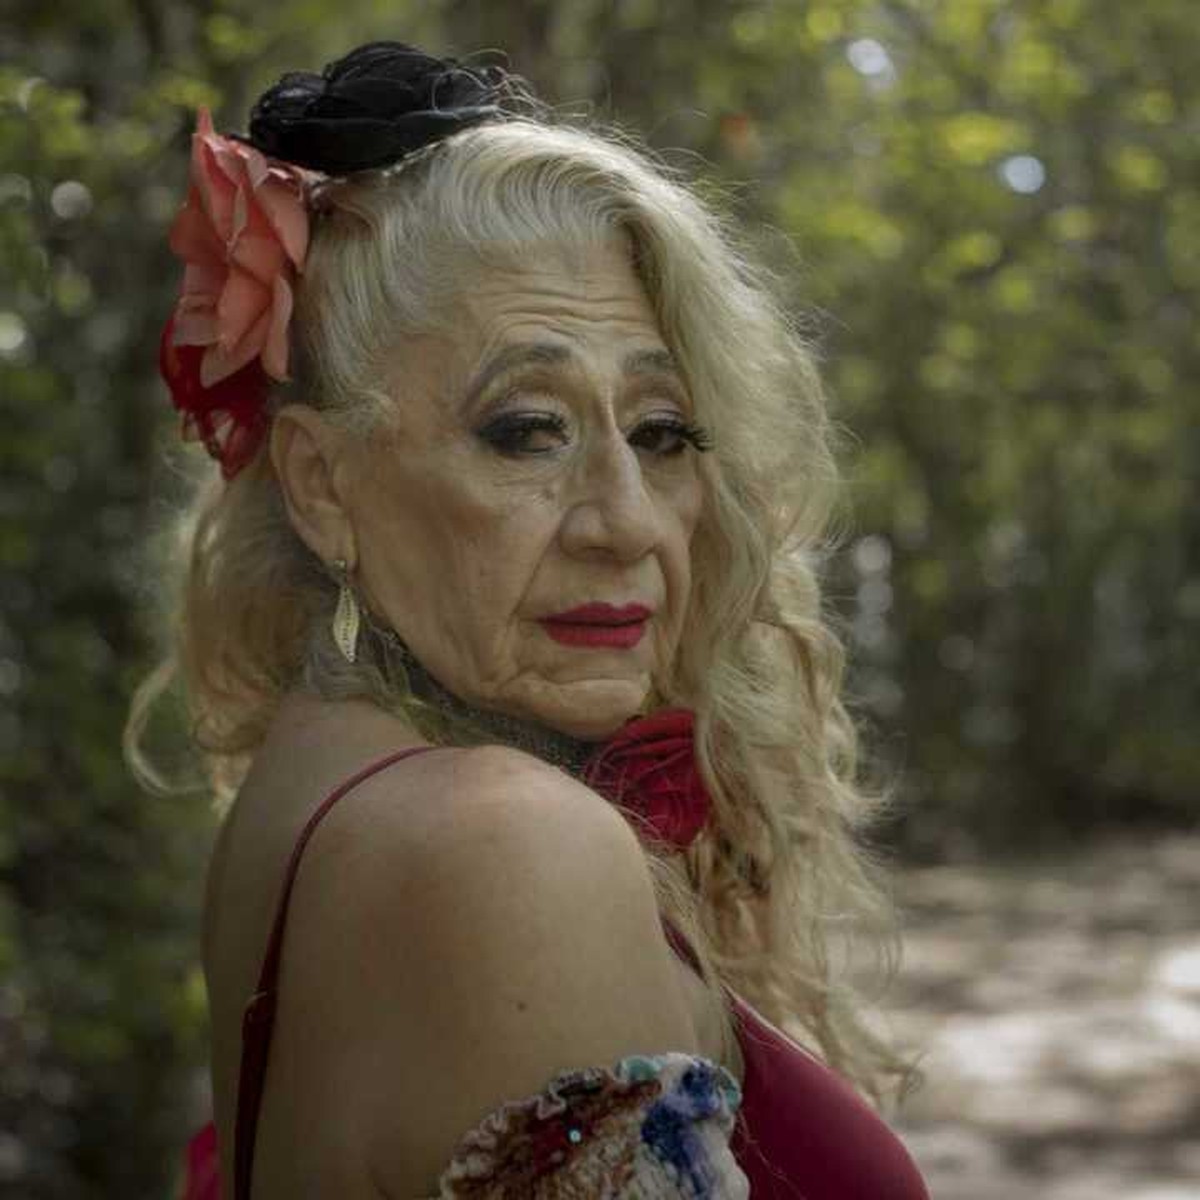 At 69, a trans woman faces prejudice for her right to exist | Alagoas